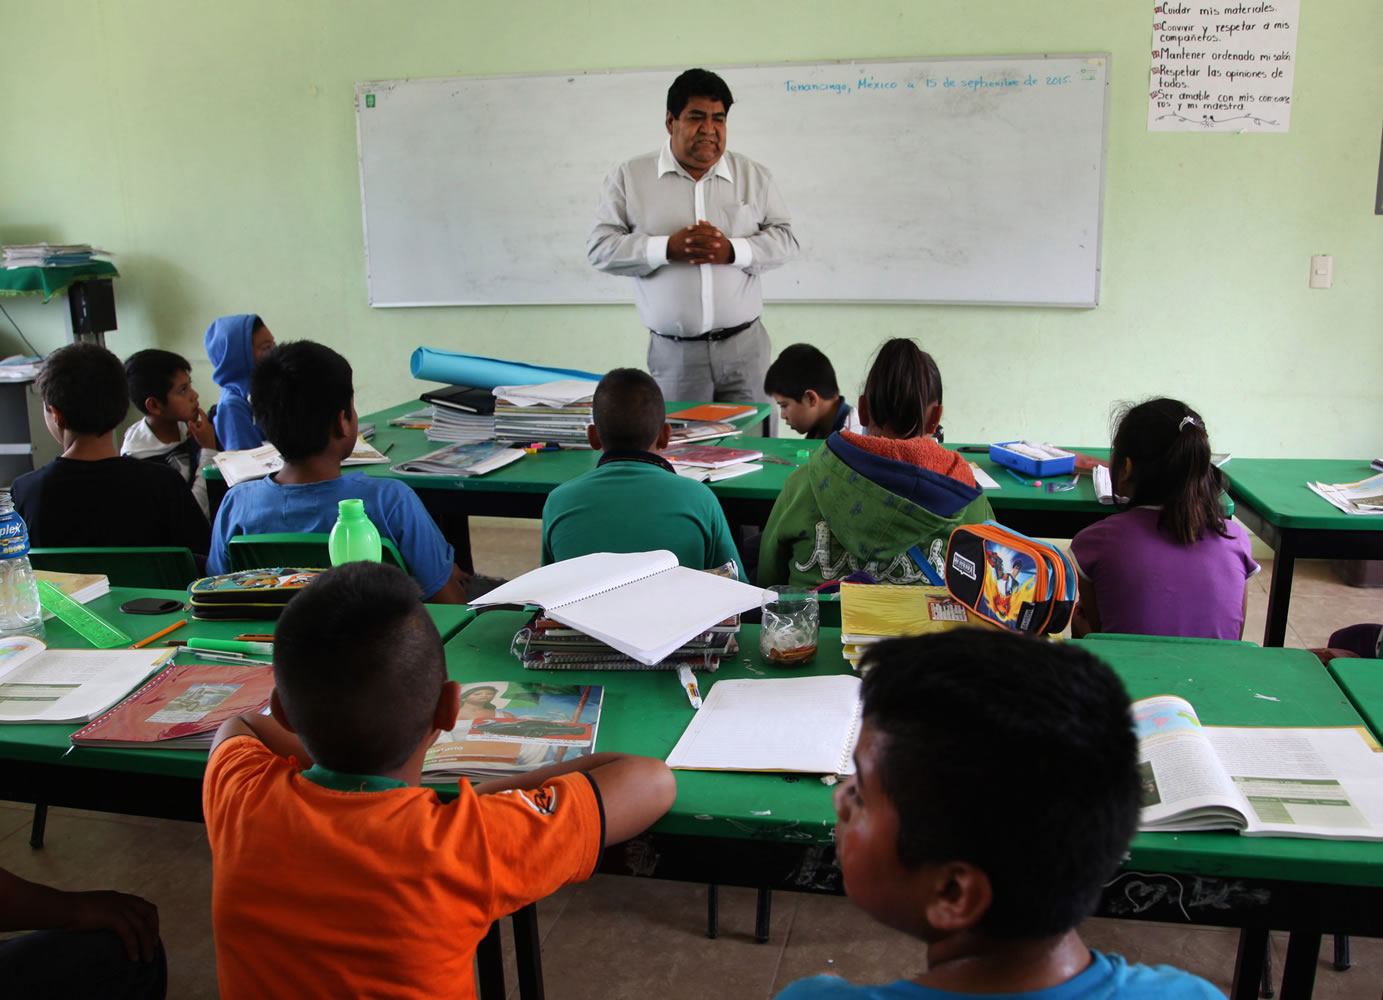 Cuitlahuac Mondragon, the uncle of slain college student Julio Cesar Mondragon, teaches at an elementary school Sept. 15 in San Miguel Tecomatlan, a rural town in the hills of Mexico state.